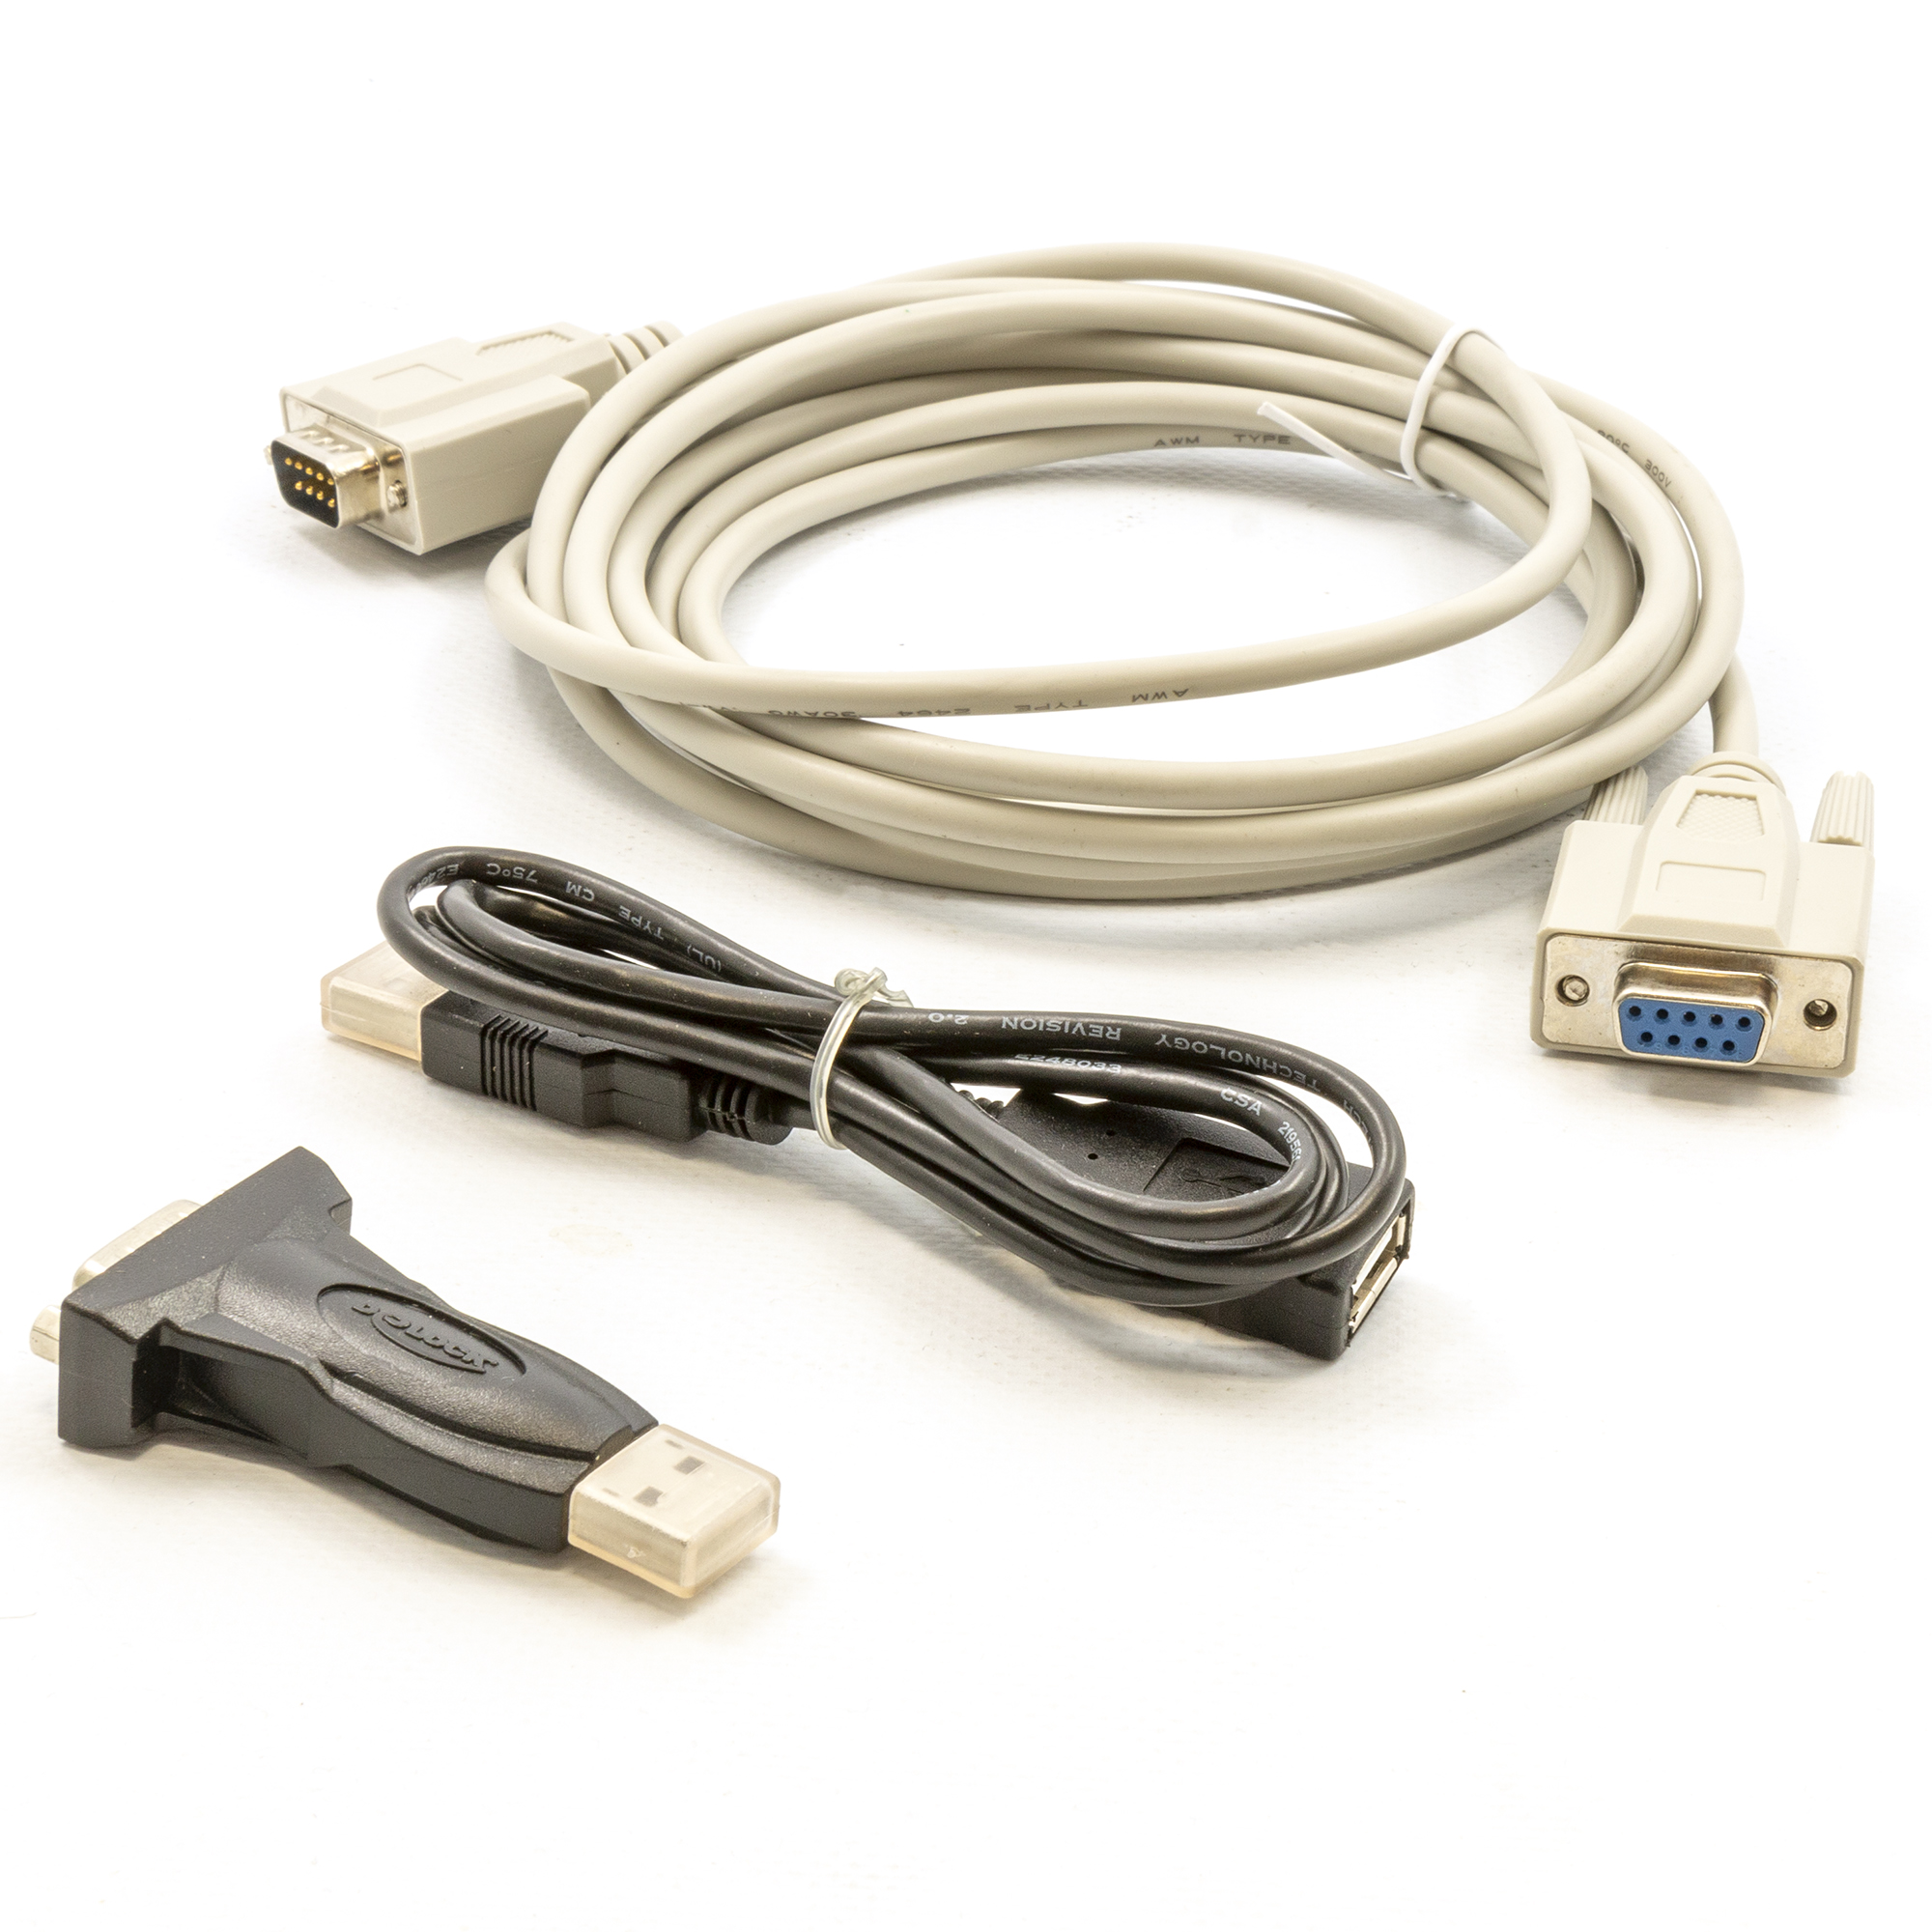 CONT 82-Q0800/3 Serial cable RS232 and RS232-USB adapter for PC connection